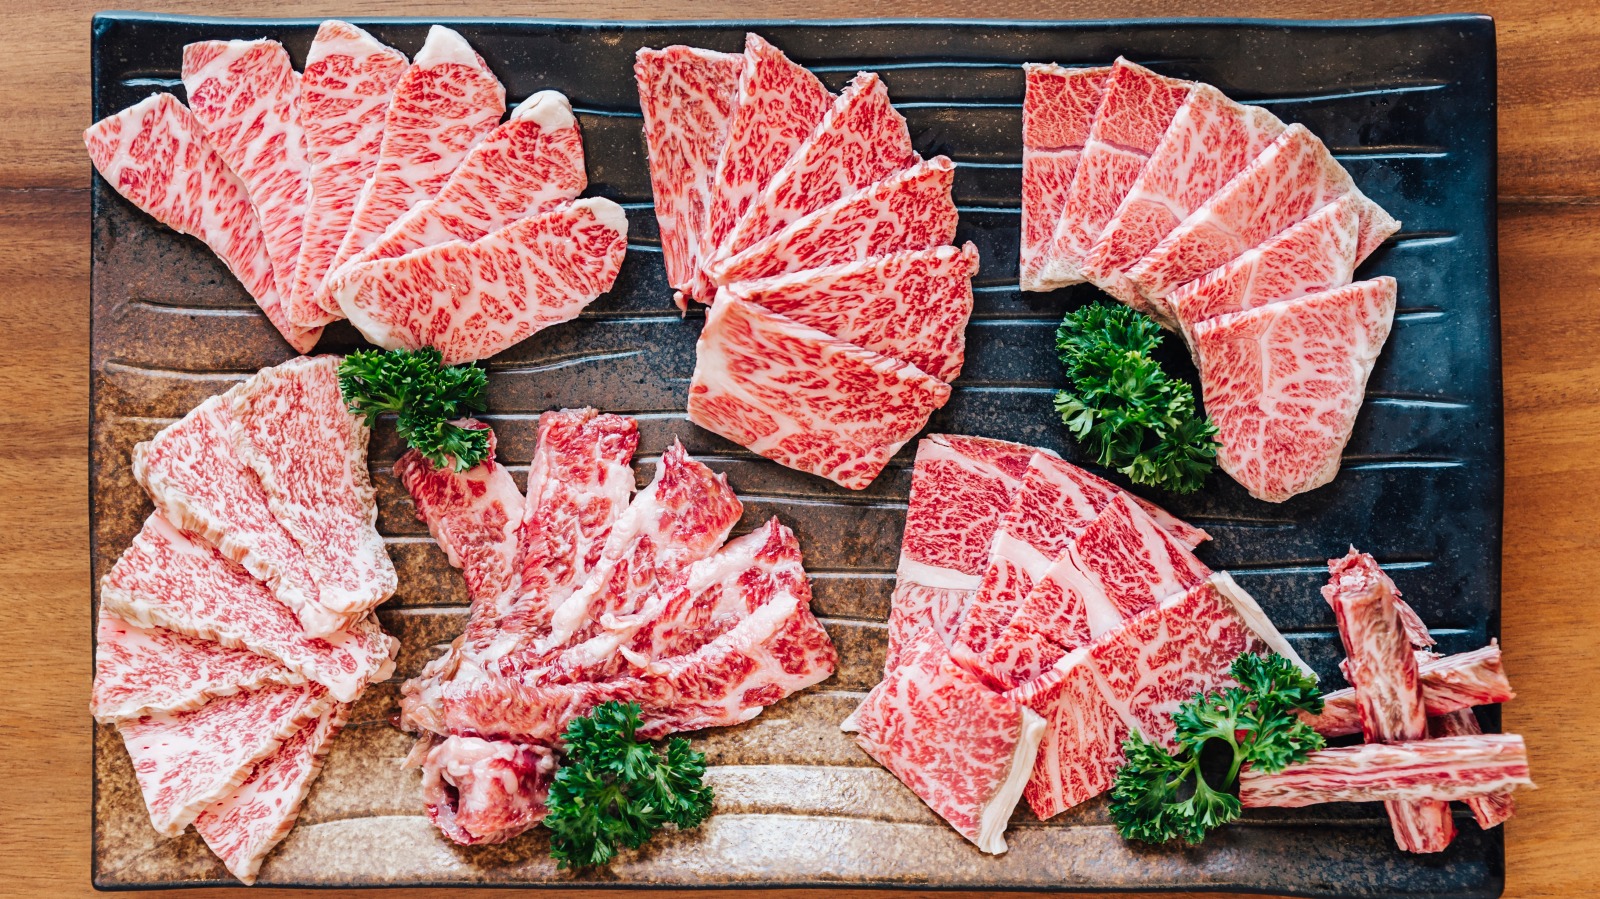 This Is Why Marbling Is So Important For High-Quality Meat